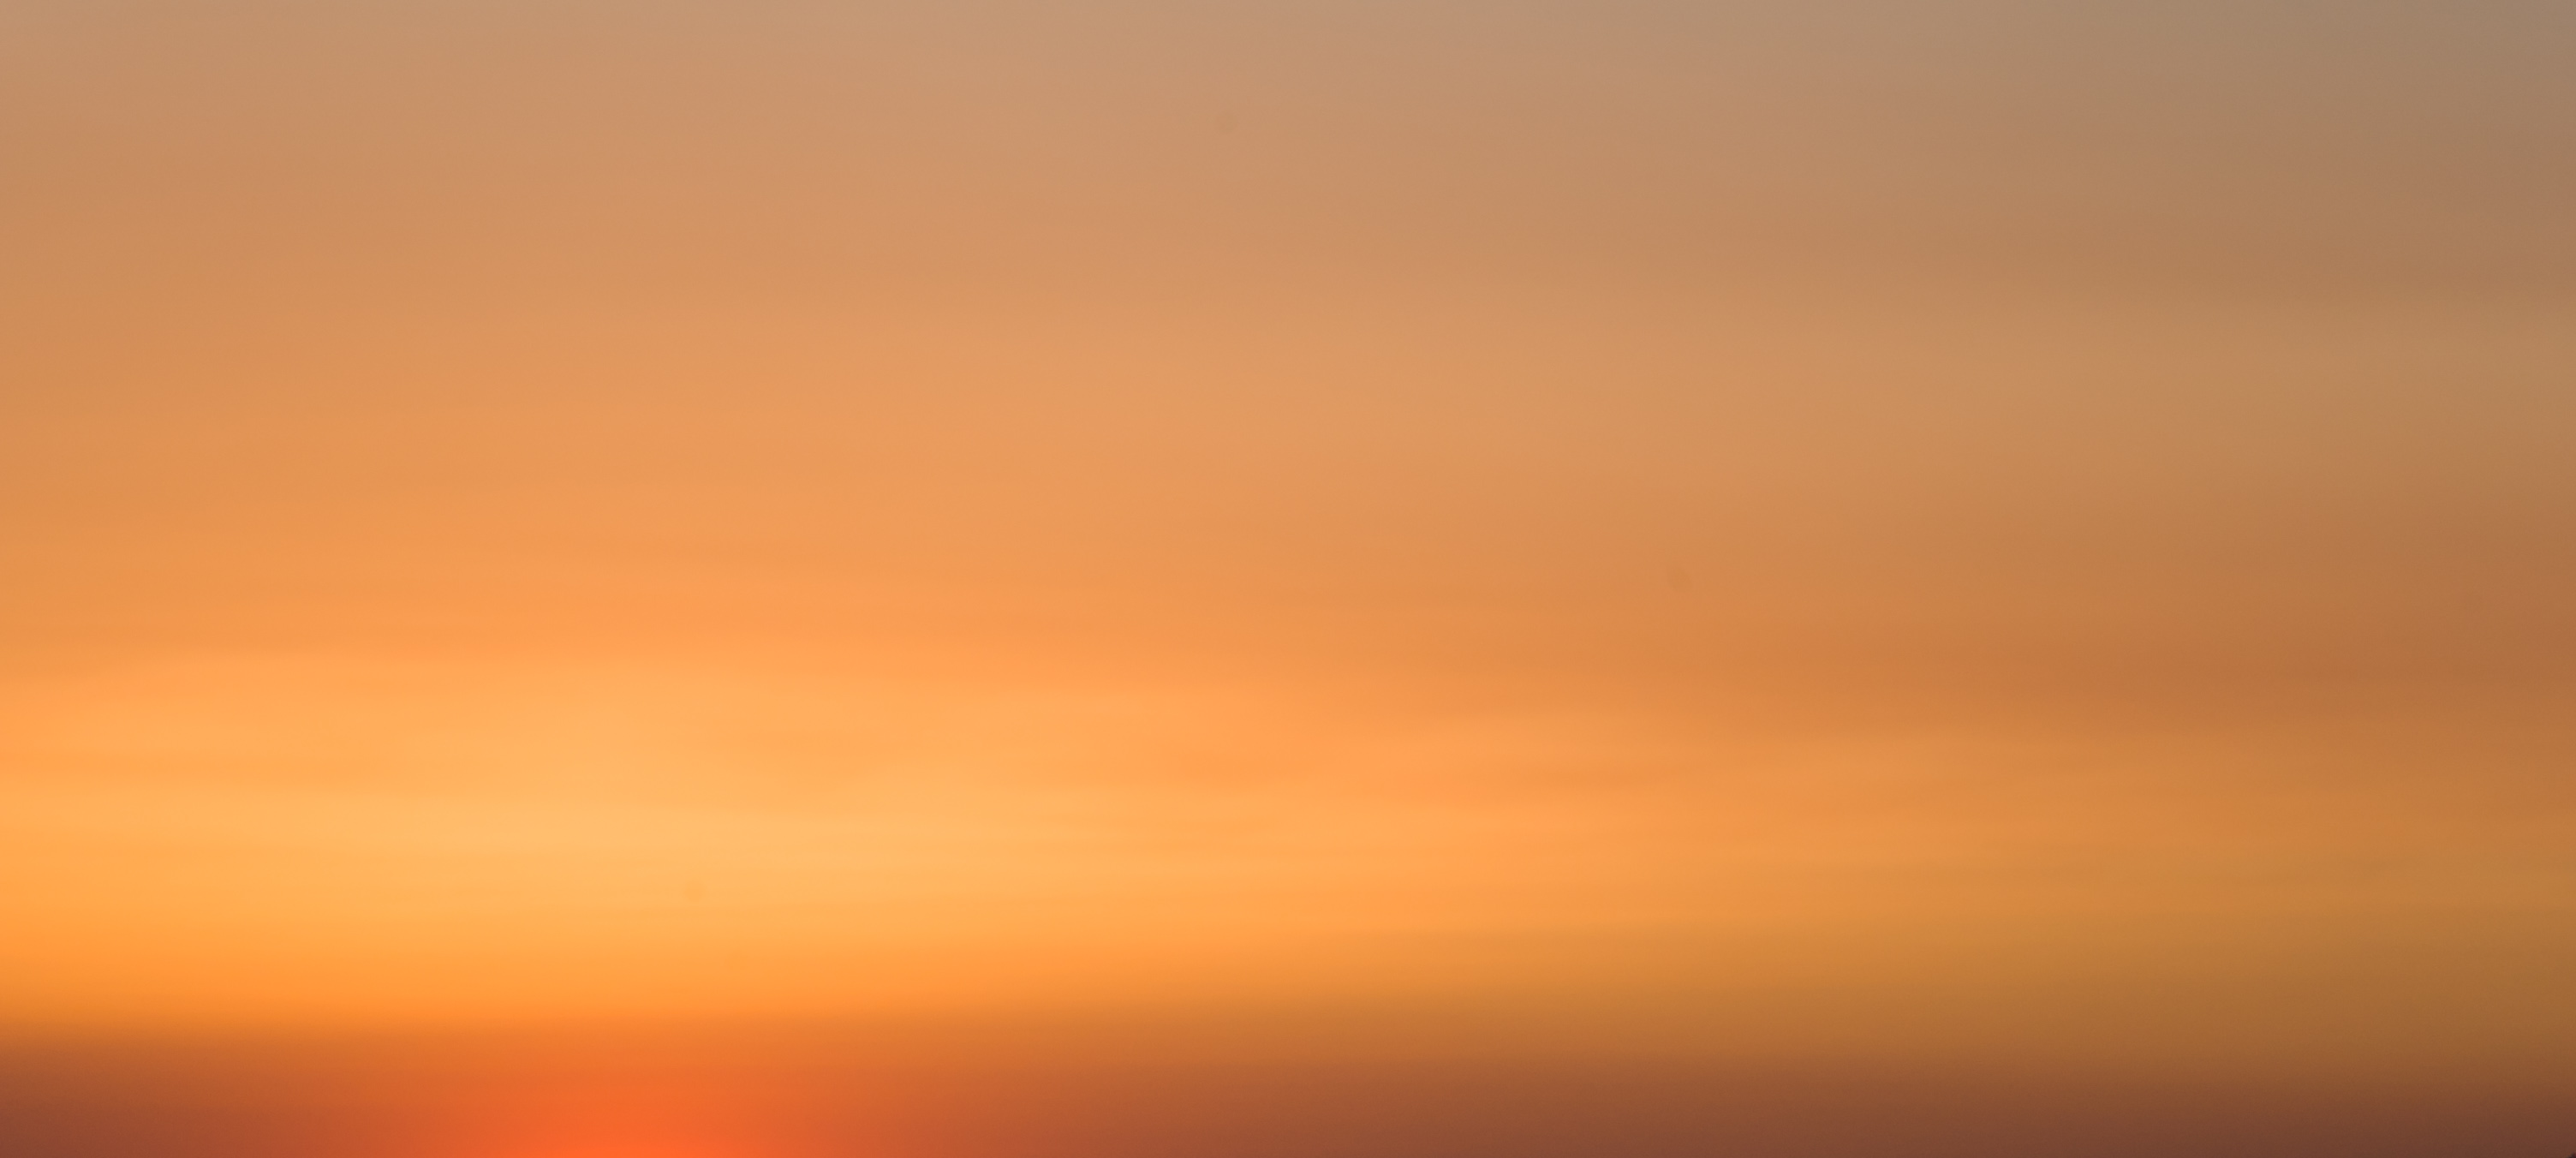 Soft Glowing Evening Sunset Sky - Pattern Pictures free textures and ...